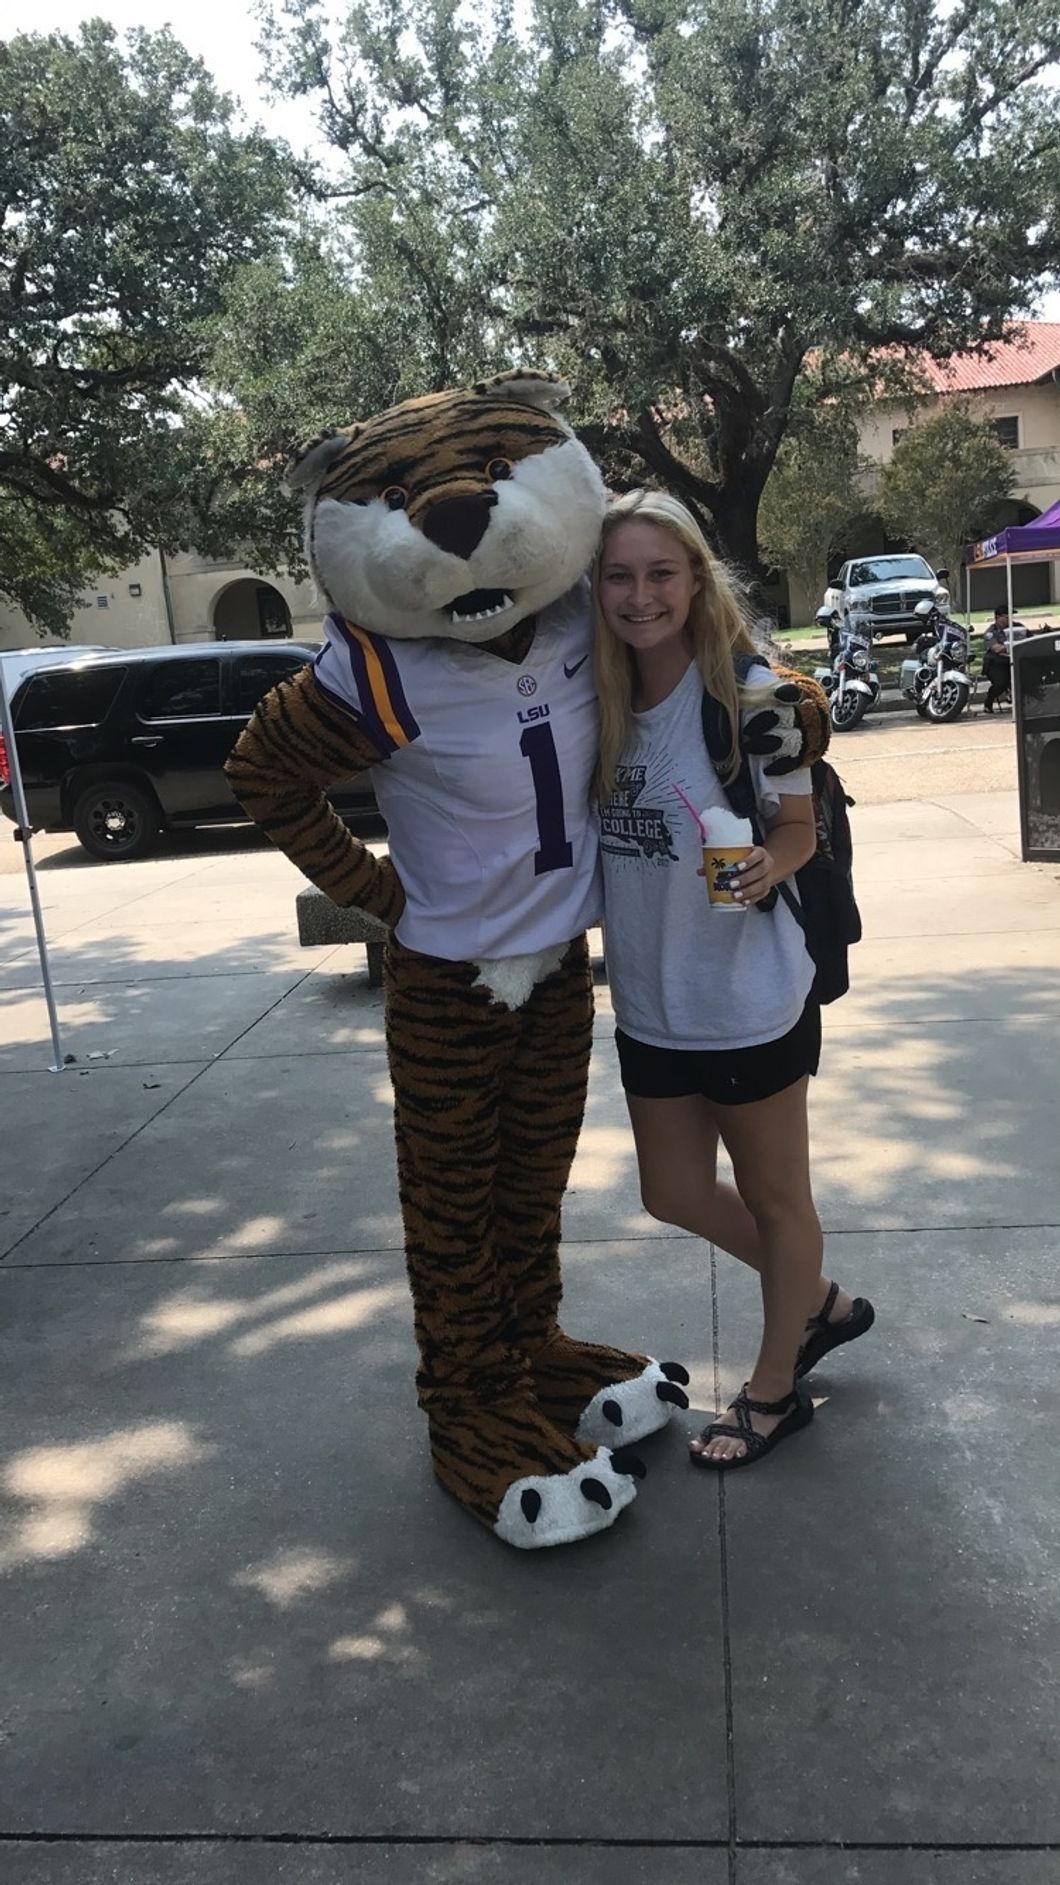 Me with Mike the Tiger